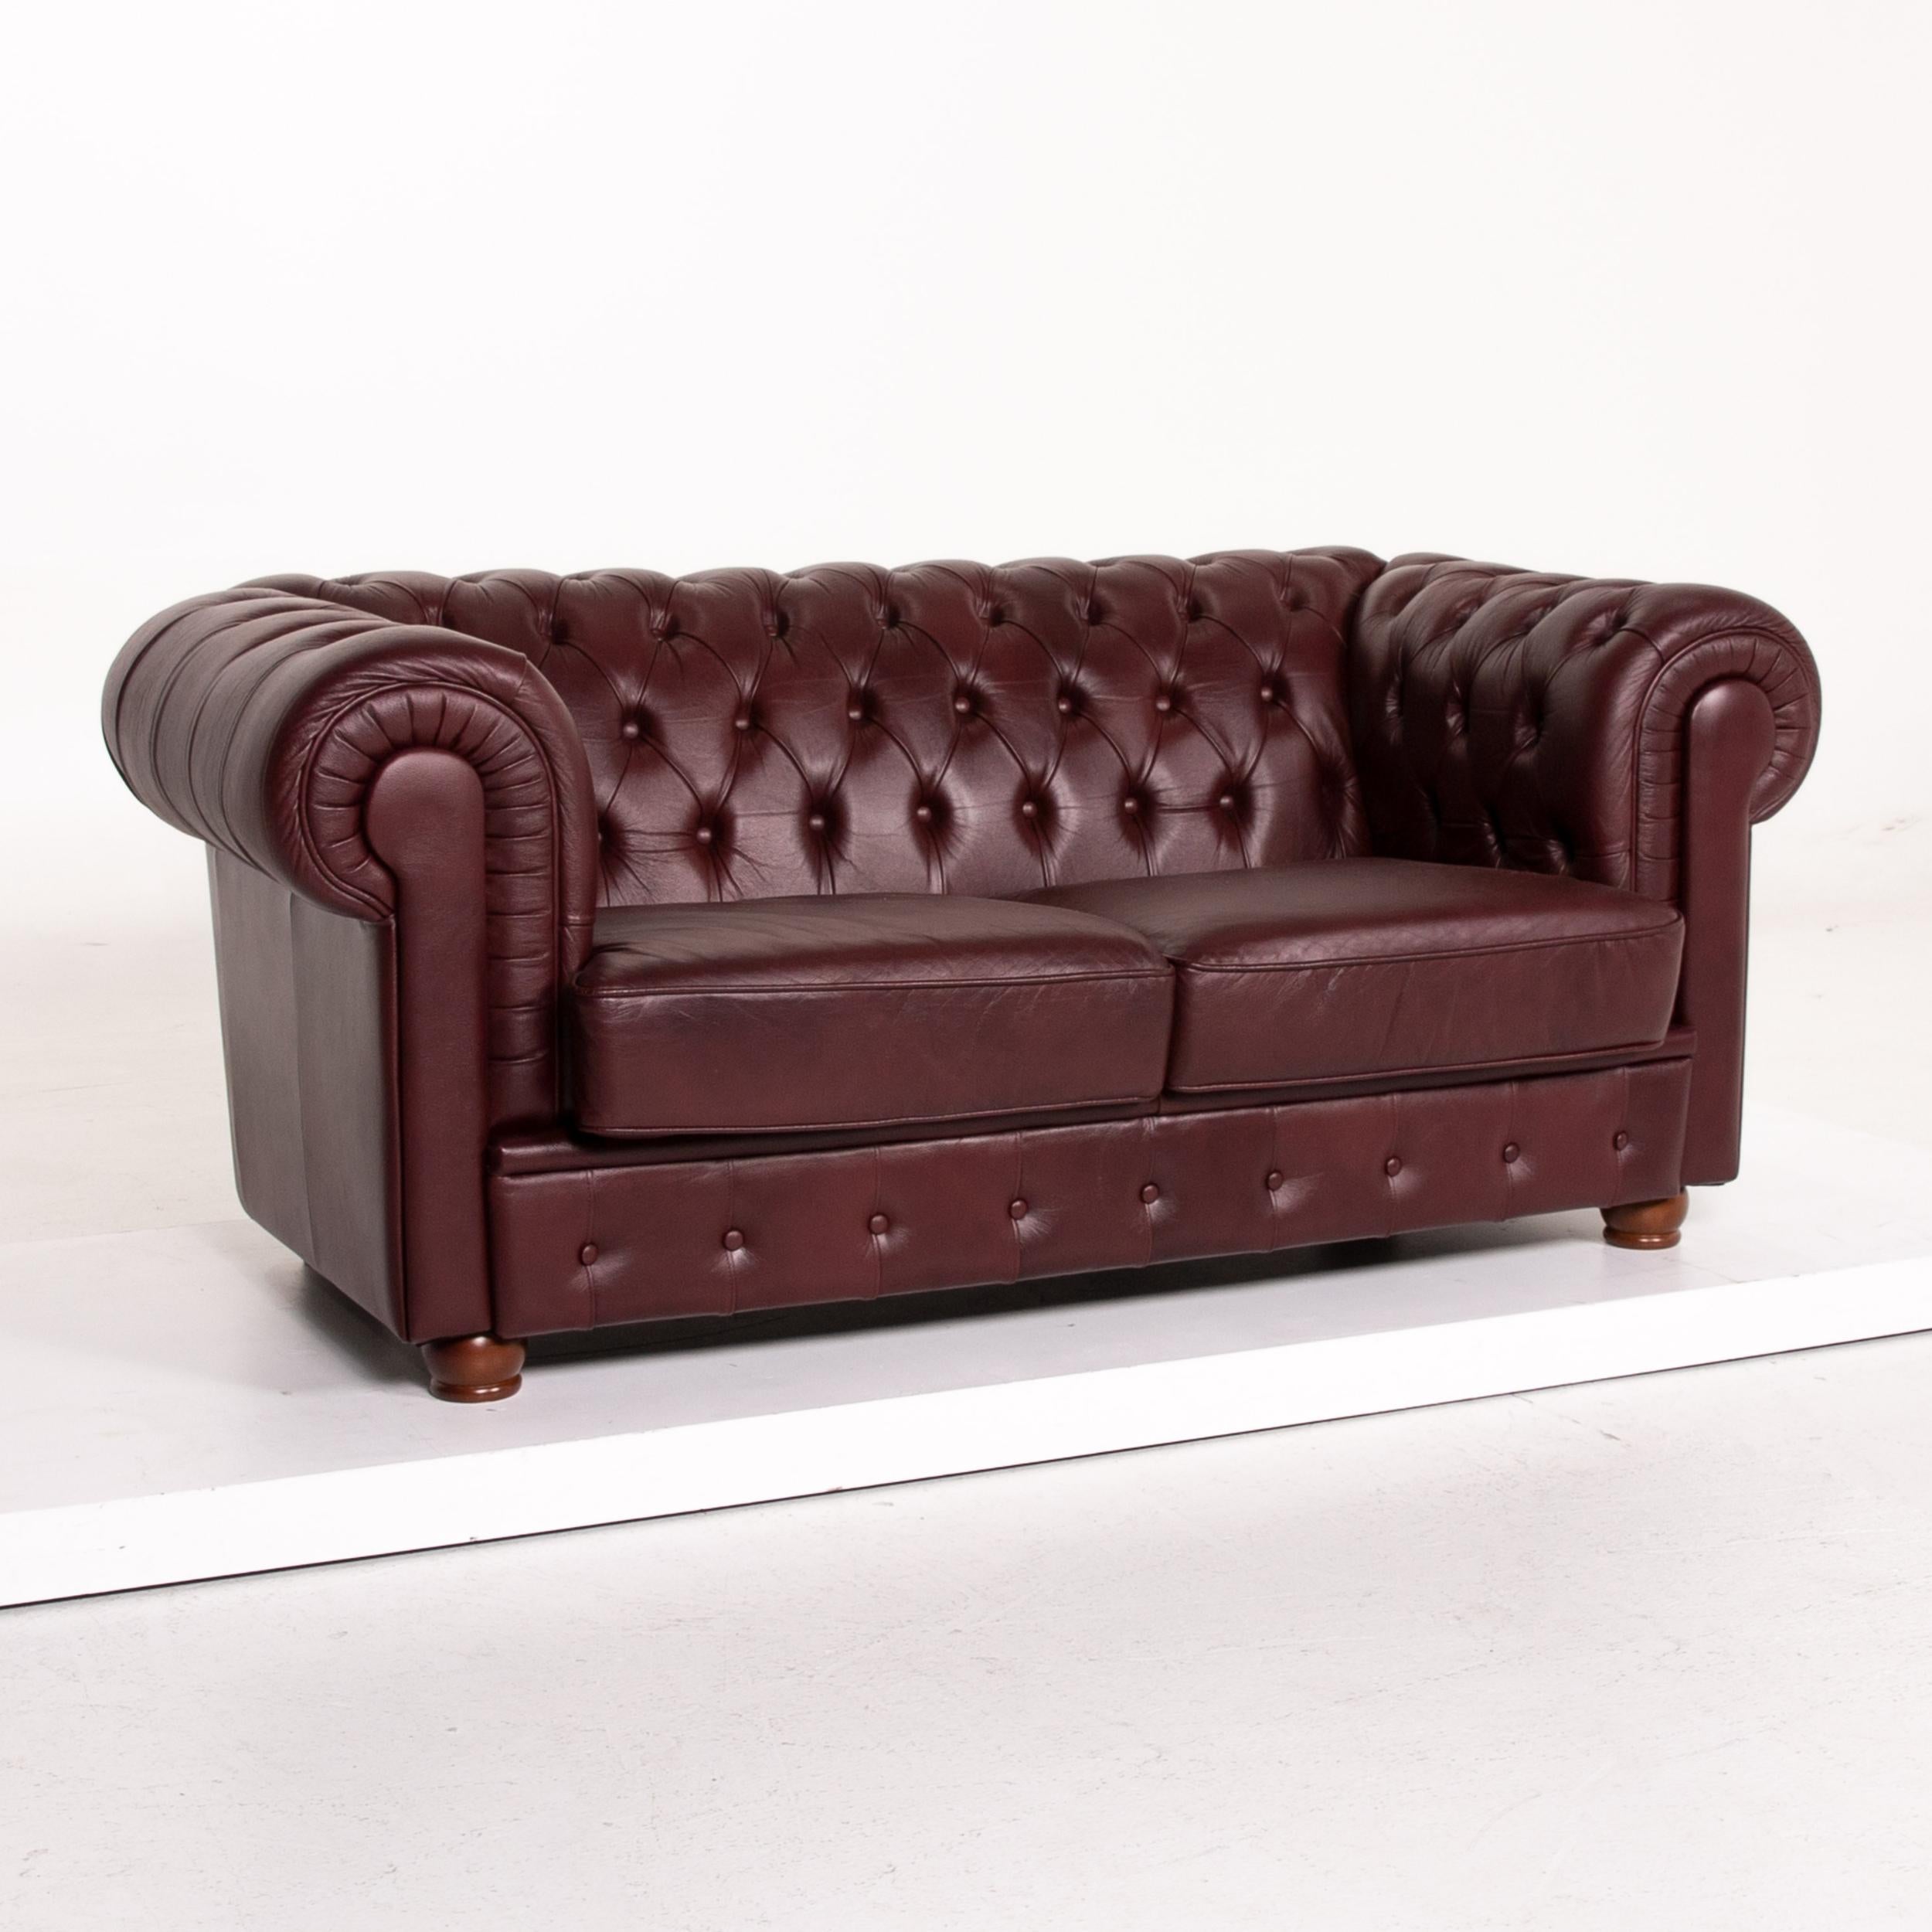 Modern Chesterfield Leather Sofa Bordeaux Red Two-Seat Vintage Retro Couch For Sale